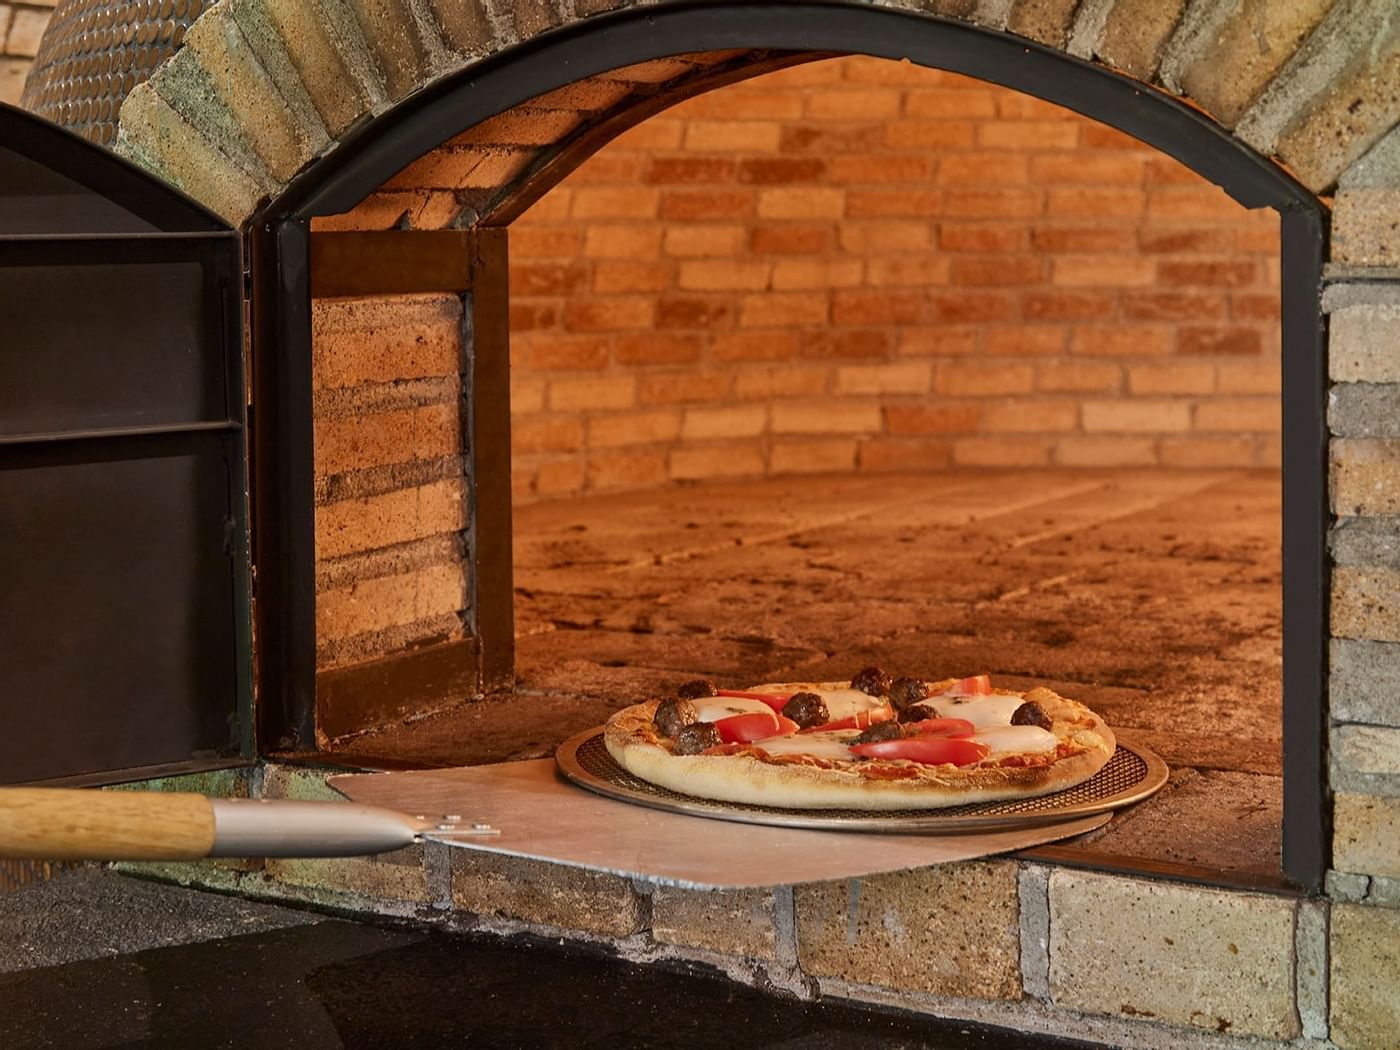 A pizza pulled from the oven at Fiesta Americana Hotels